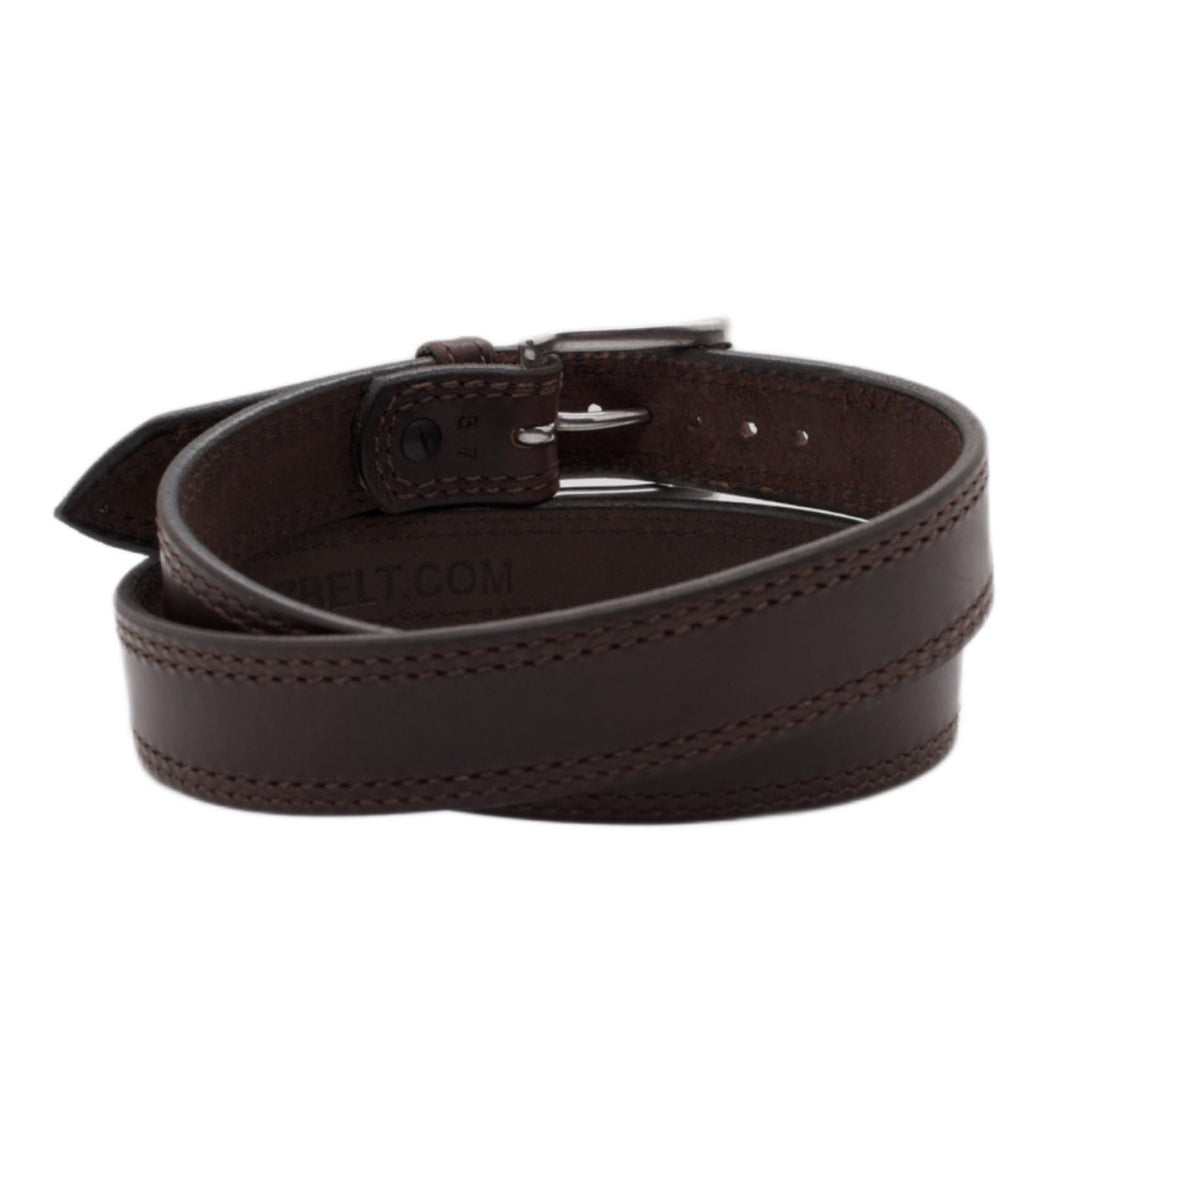 The SEQUOIA 1.5 Leather Belt